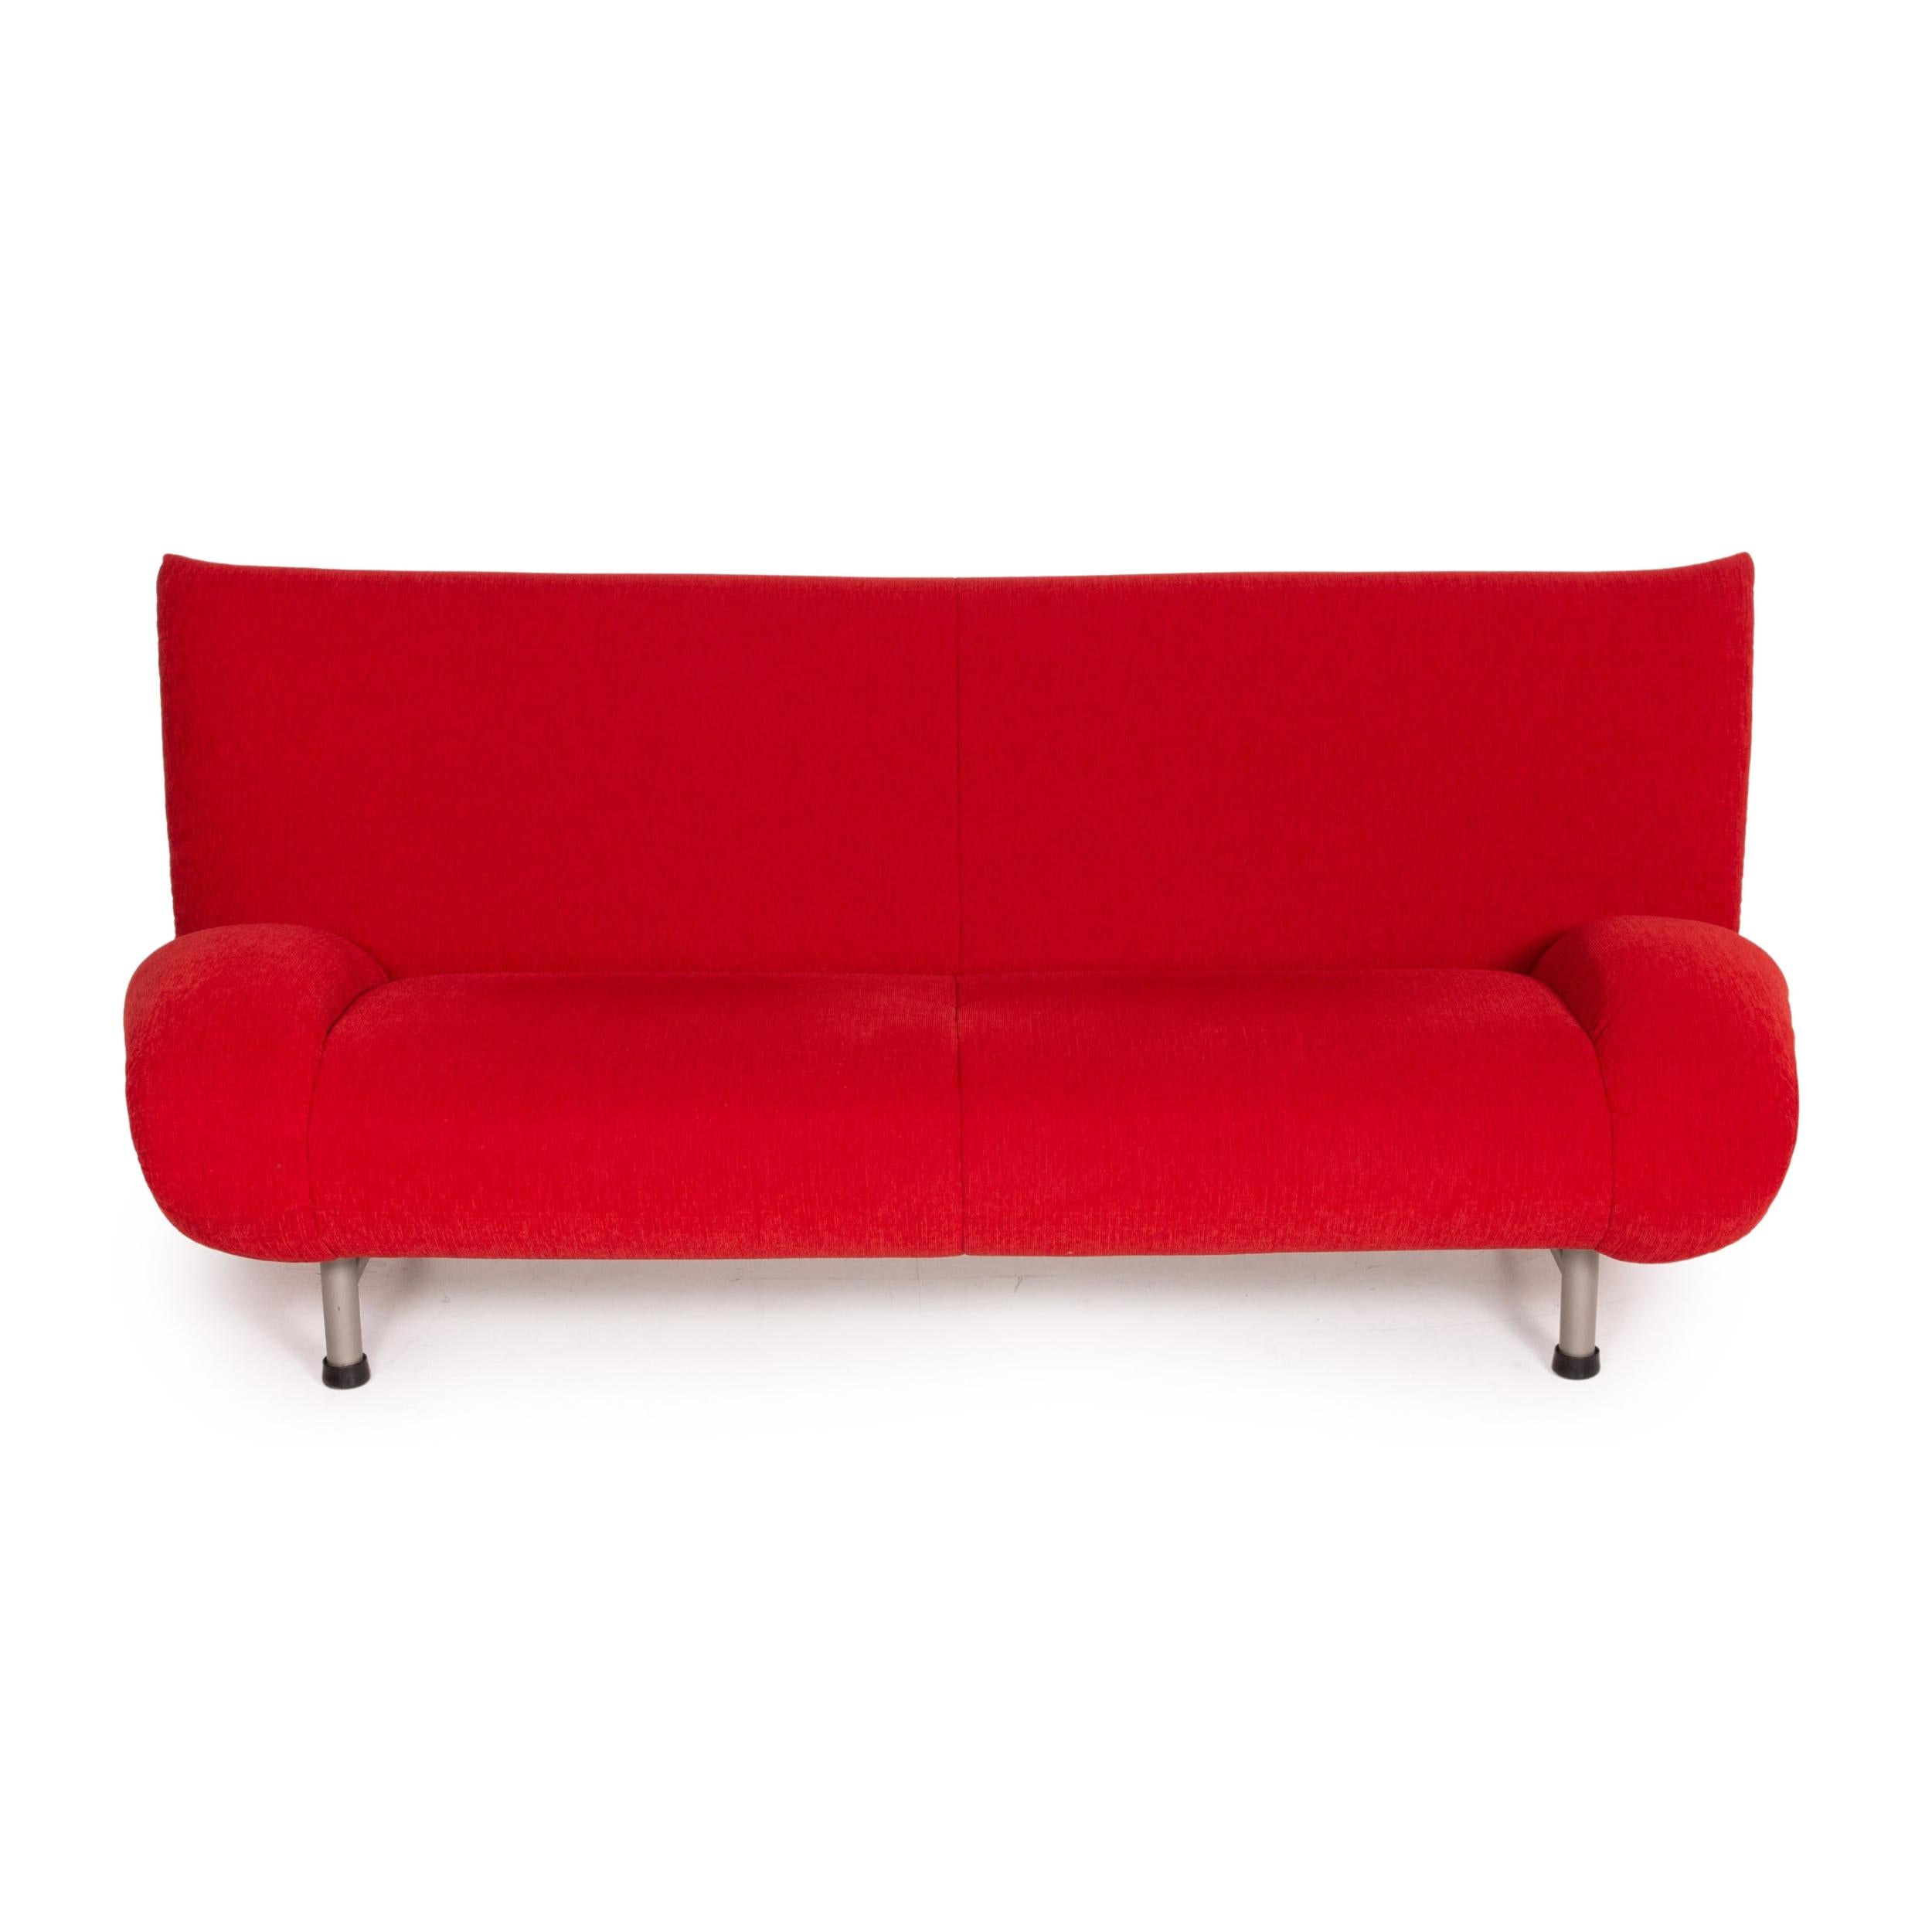 Contemporary Rolf Benz Fabric Sofa Red Three-seater Couch